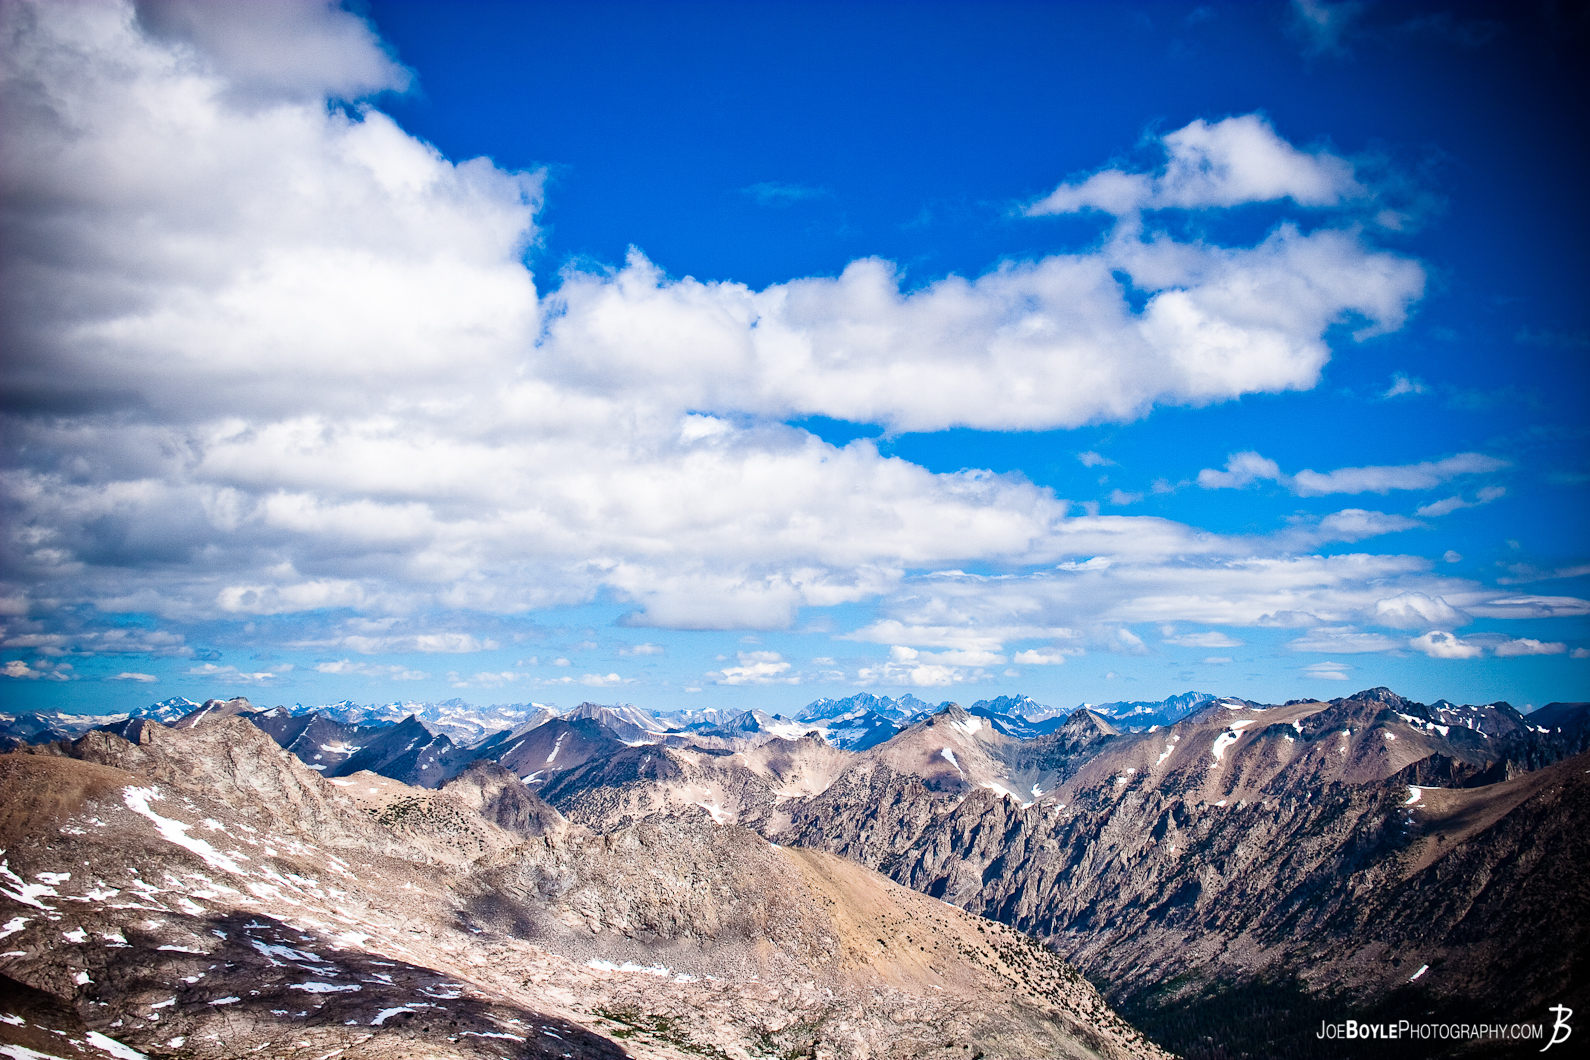  This was the view from on top of Forrester Pass. The last pass before reaching Mt. Whitney! 